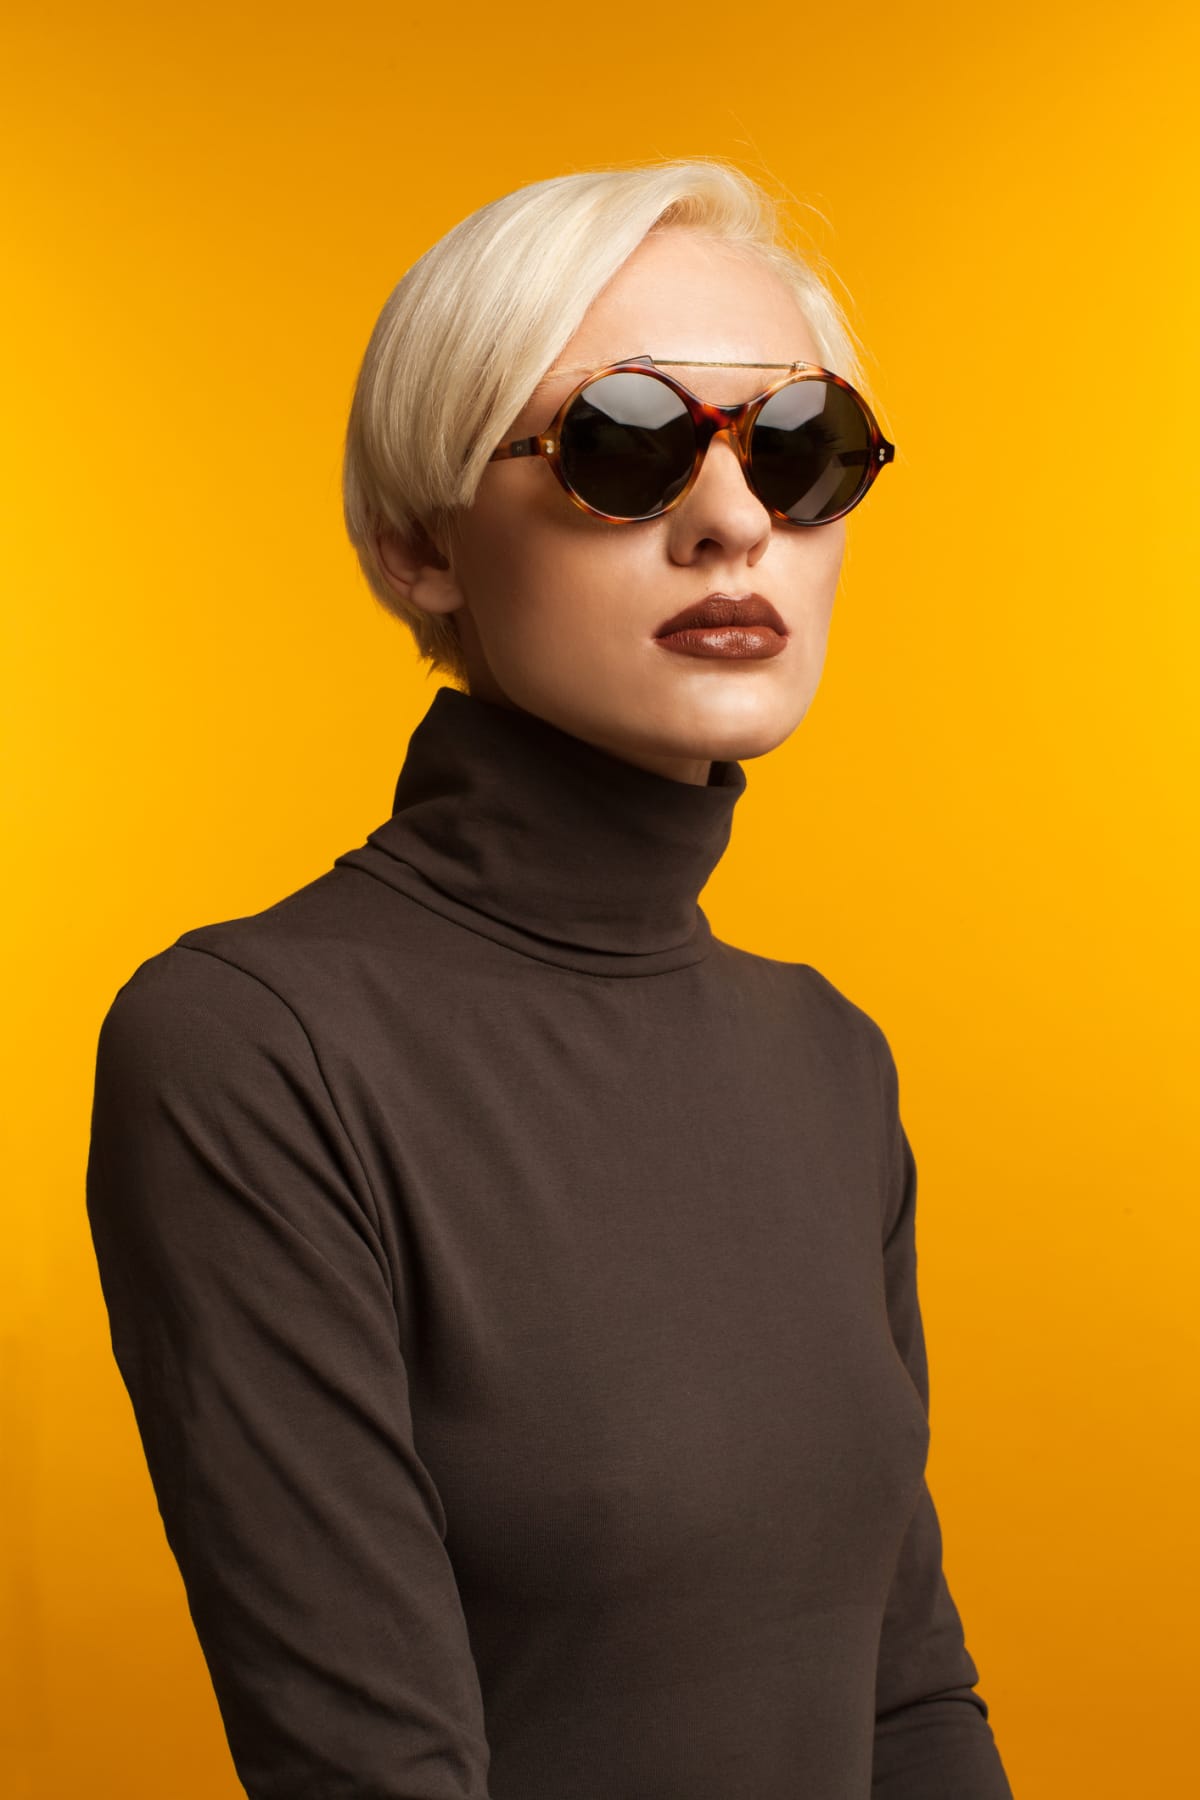 Portrait of blond girl wearing sunglasses and brown sweater. Shot in studio on yellow background.